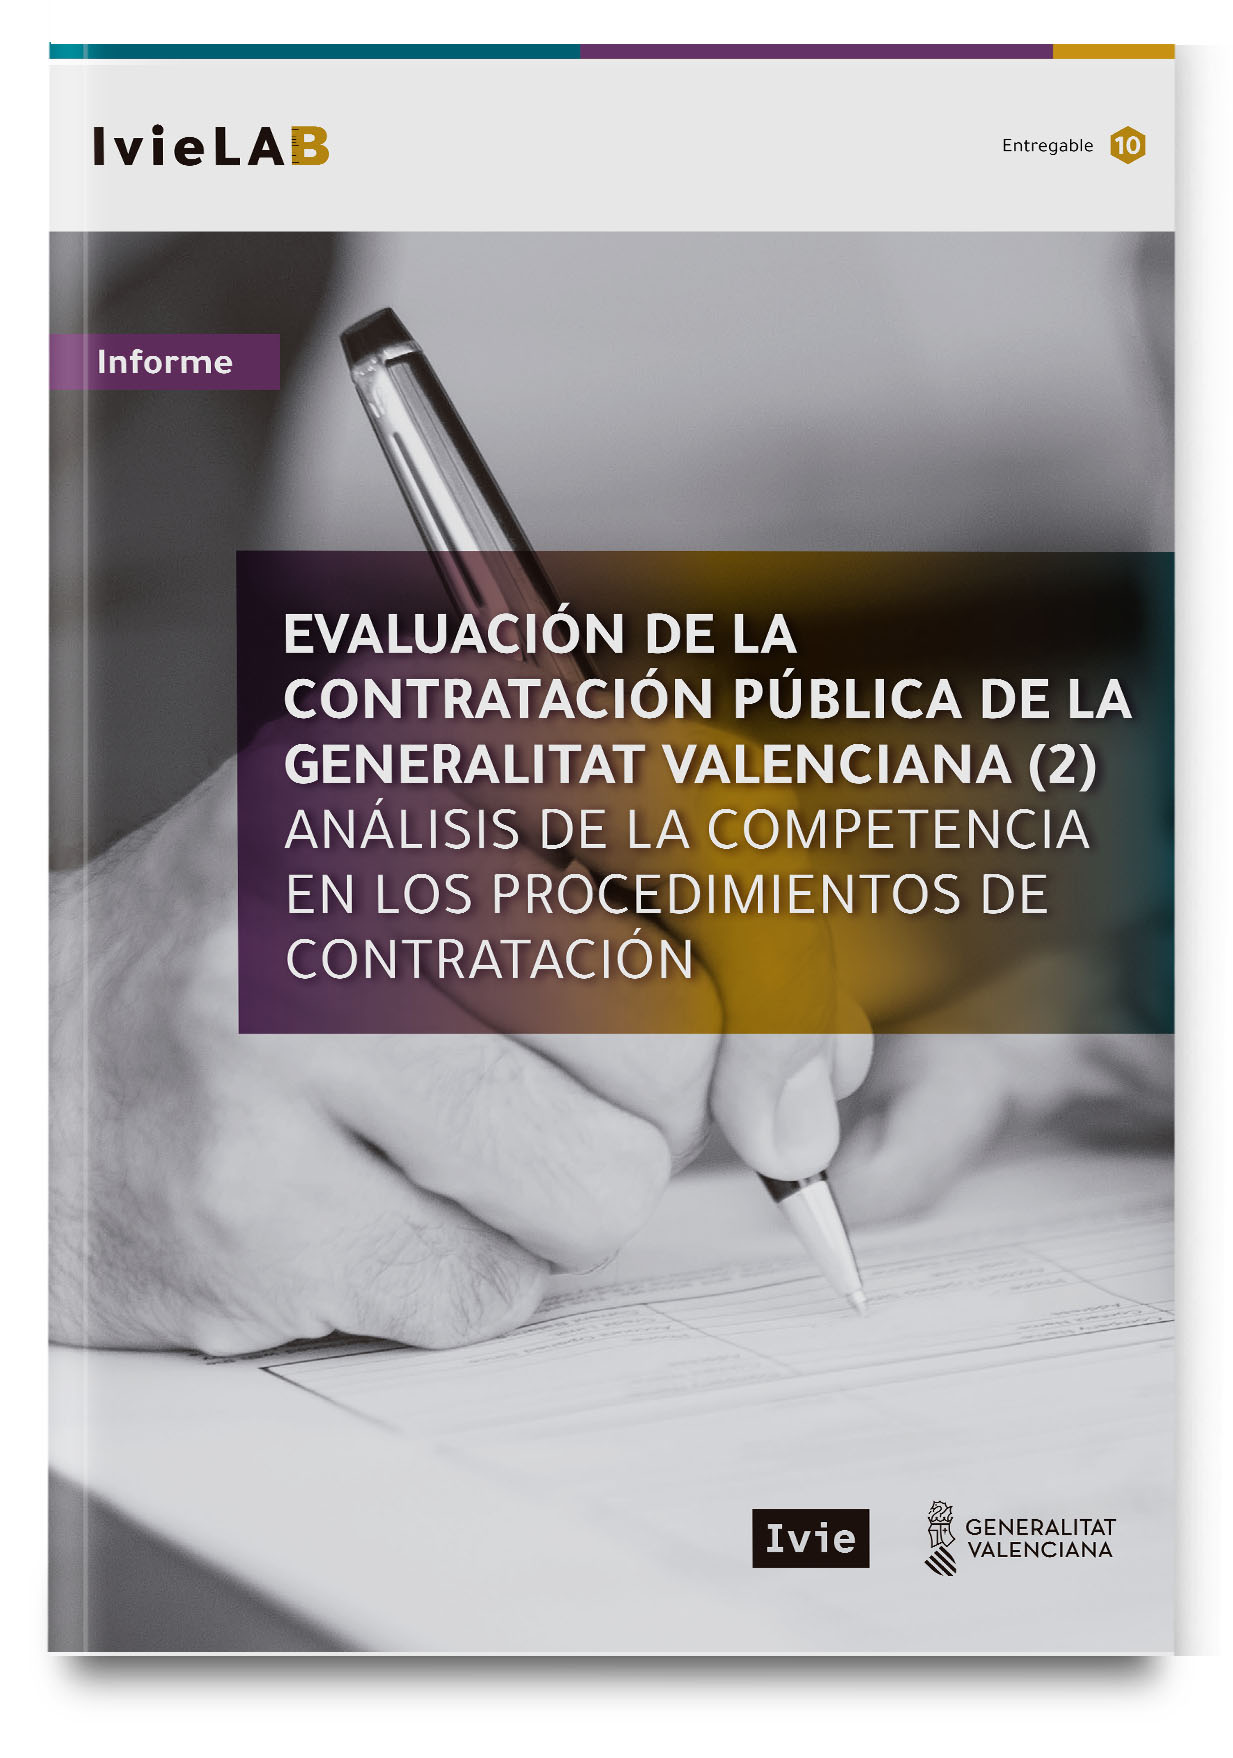 IvieLAB: Evaluation of public procurement by the Valencian regional government. Part 2. Analysis of competition in public procurement procedures